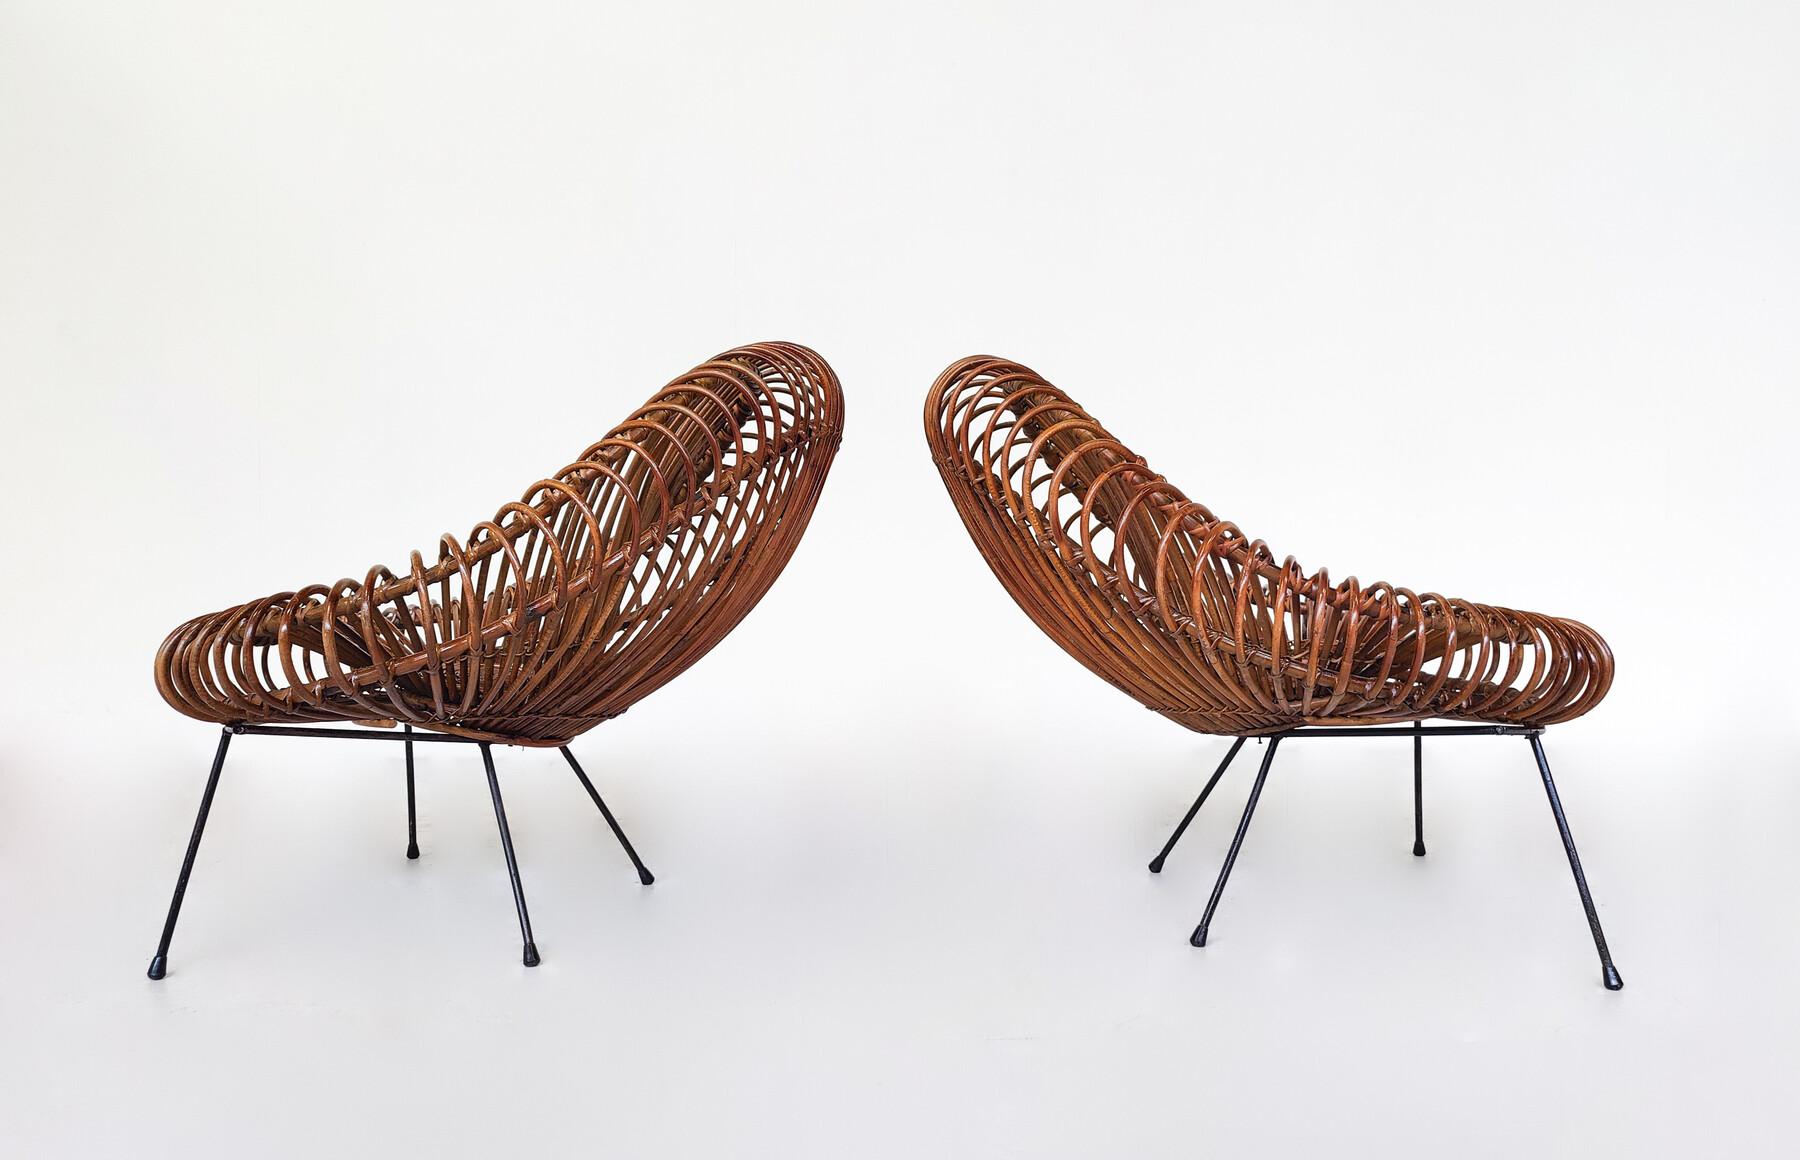 Italian Mid-Century Modern Pair of Chairs by Janine Abraham & Dirk Jan Rol for Rougier  For Sale